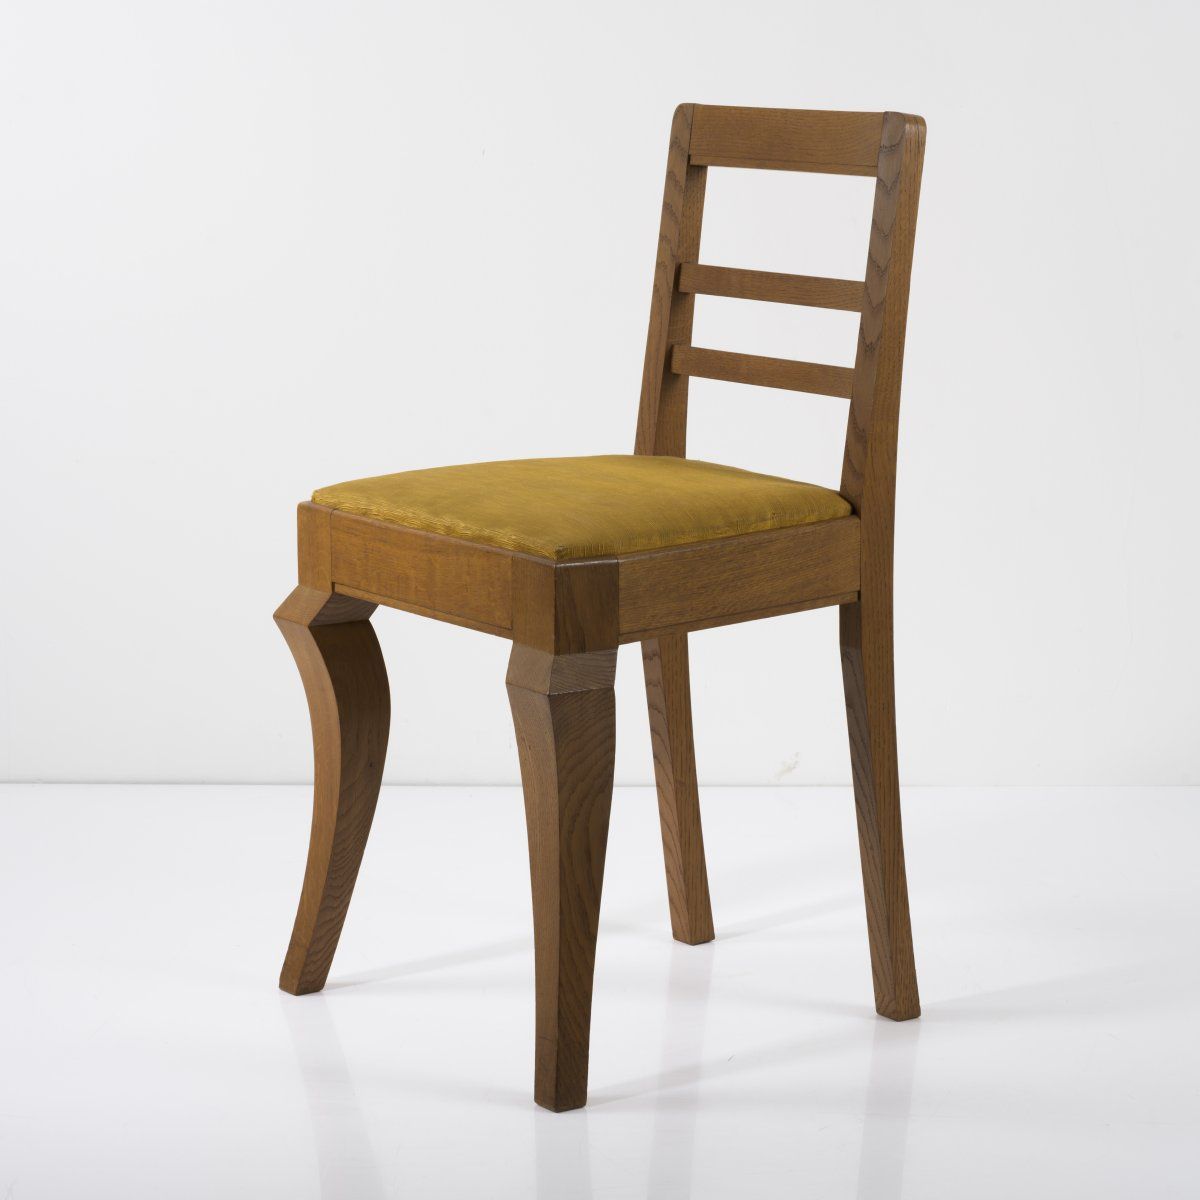 Null Germany, Chair, 1920s, H. 84 x 49 x 45.5 cm. Oak wood, textile cover, golde&hellip;